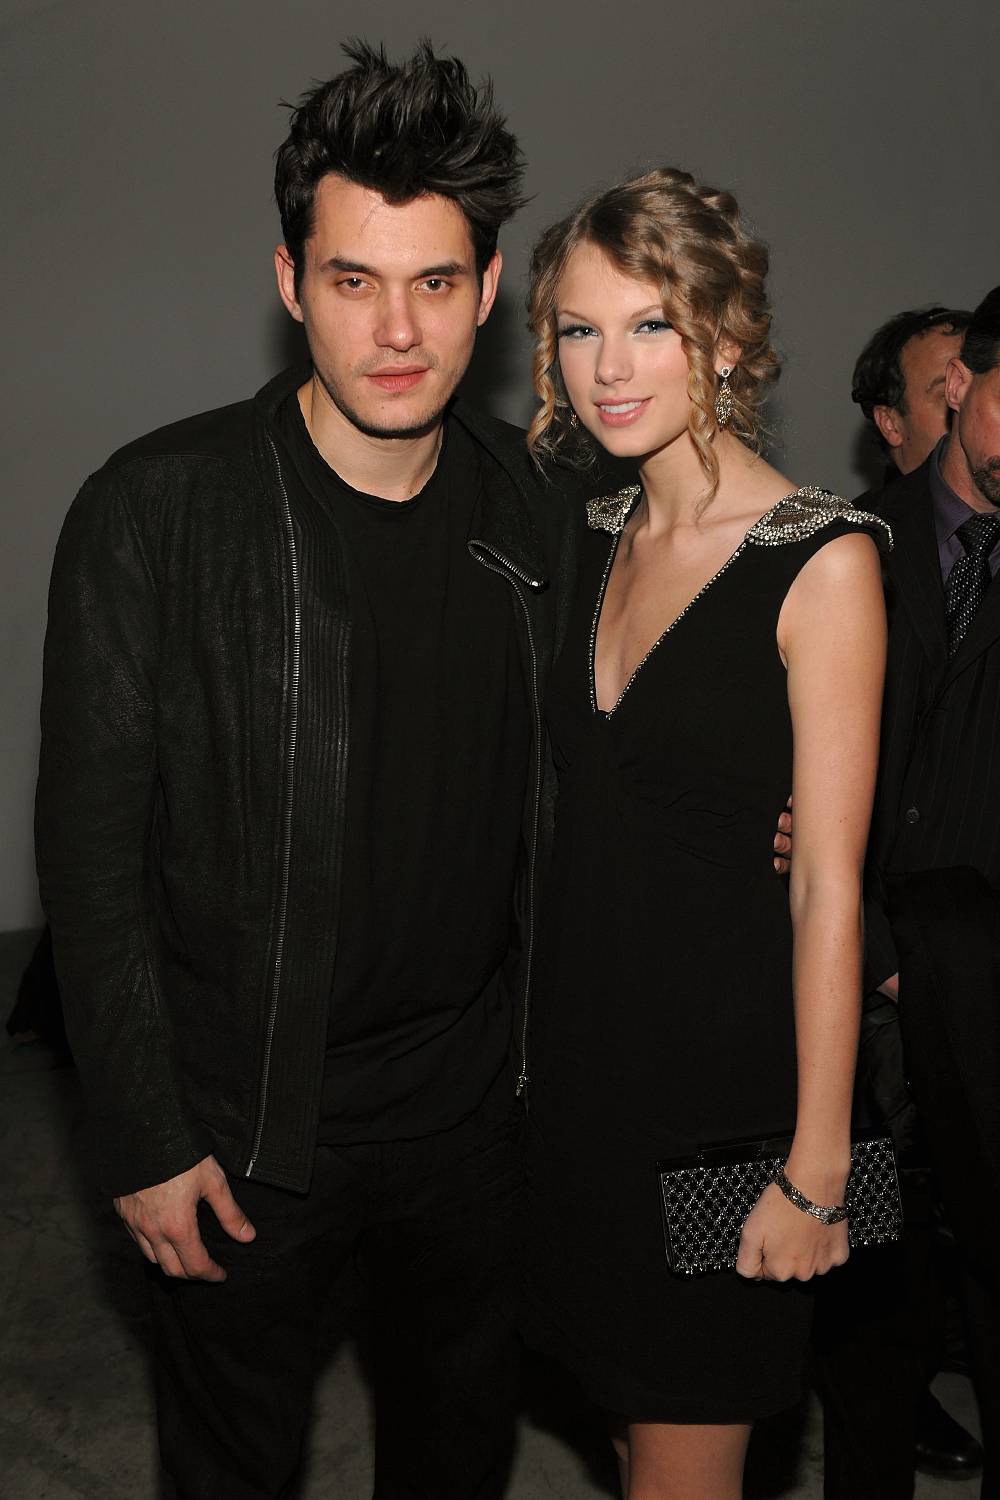 Mayer and Taylor Swift